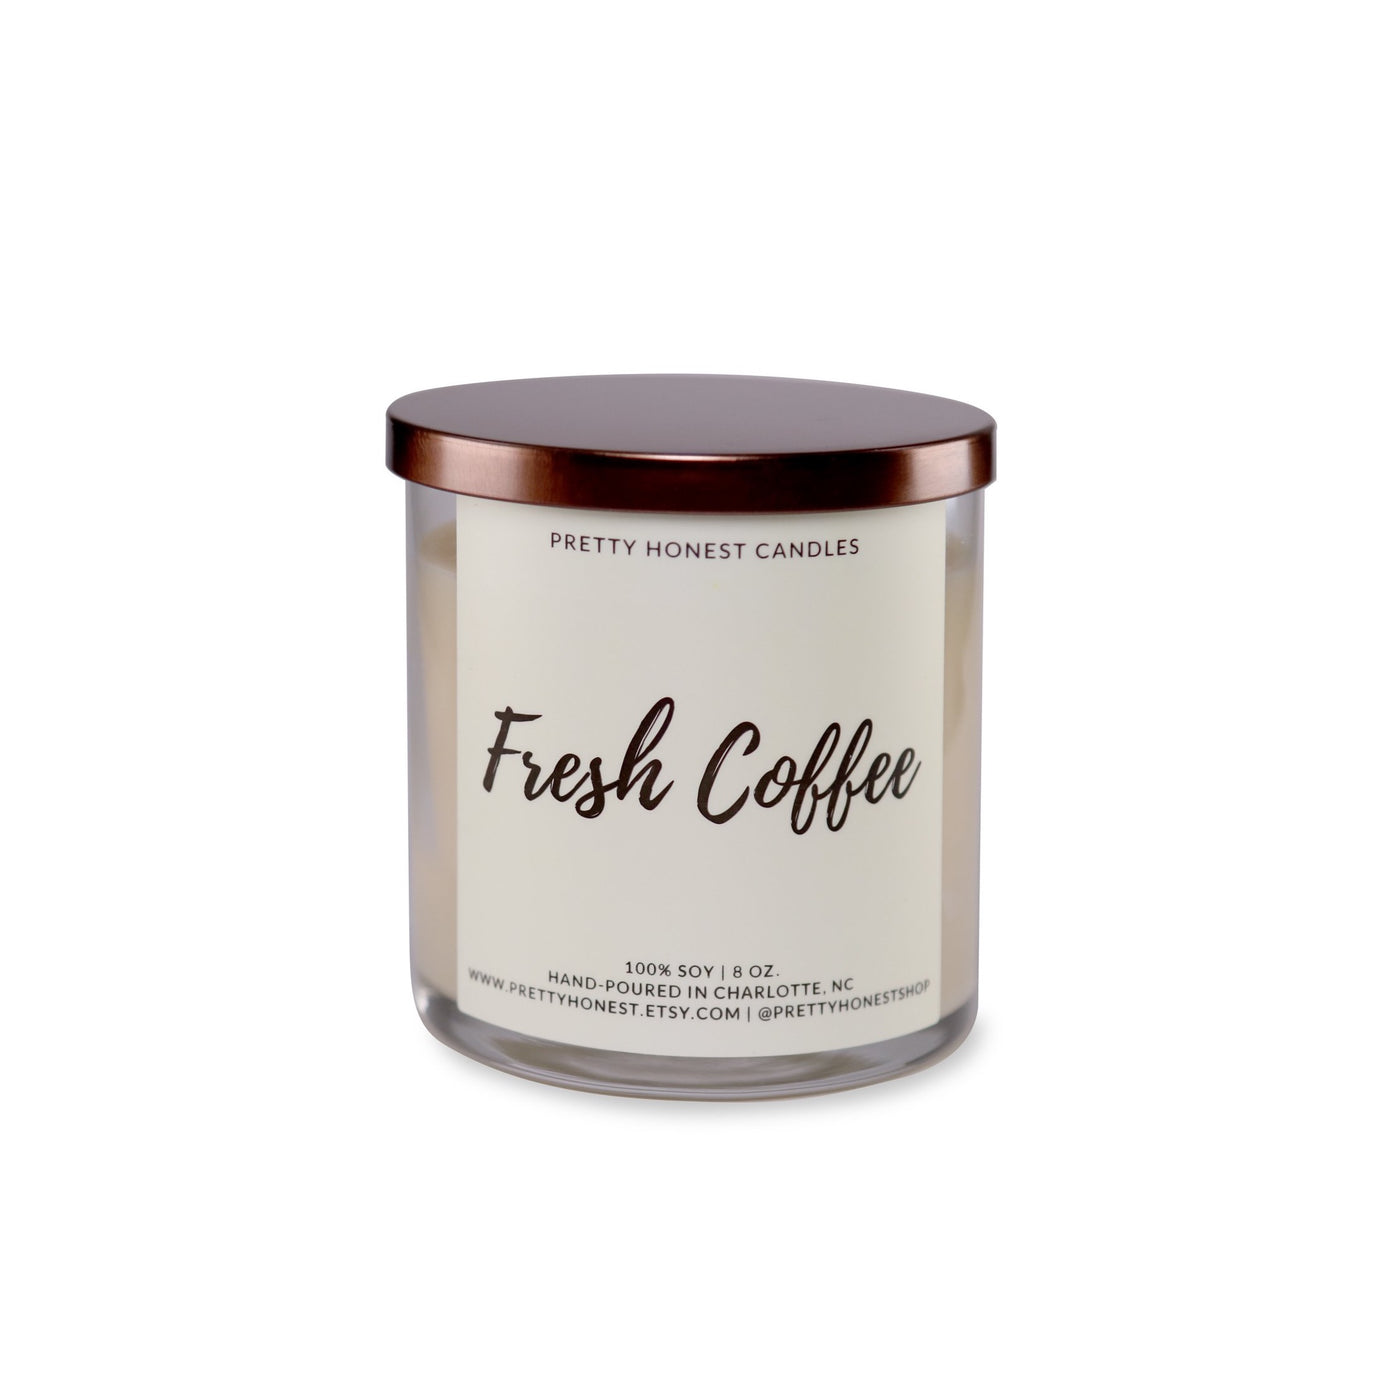 Fresh Coffee Soy Candle - Pretty Honest Candles